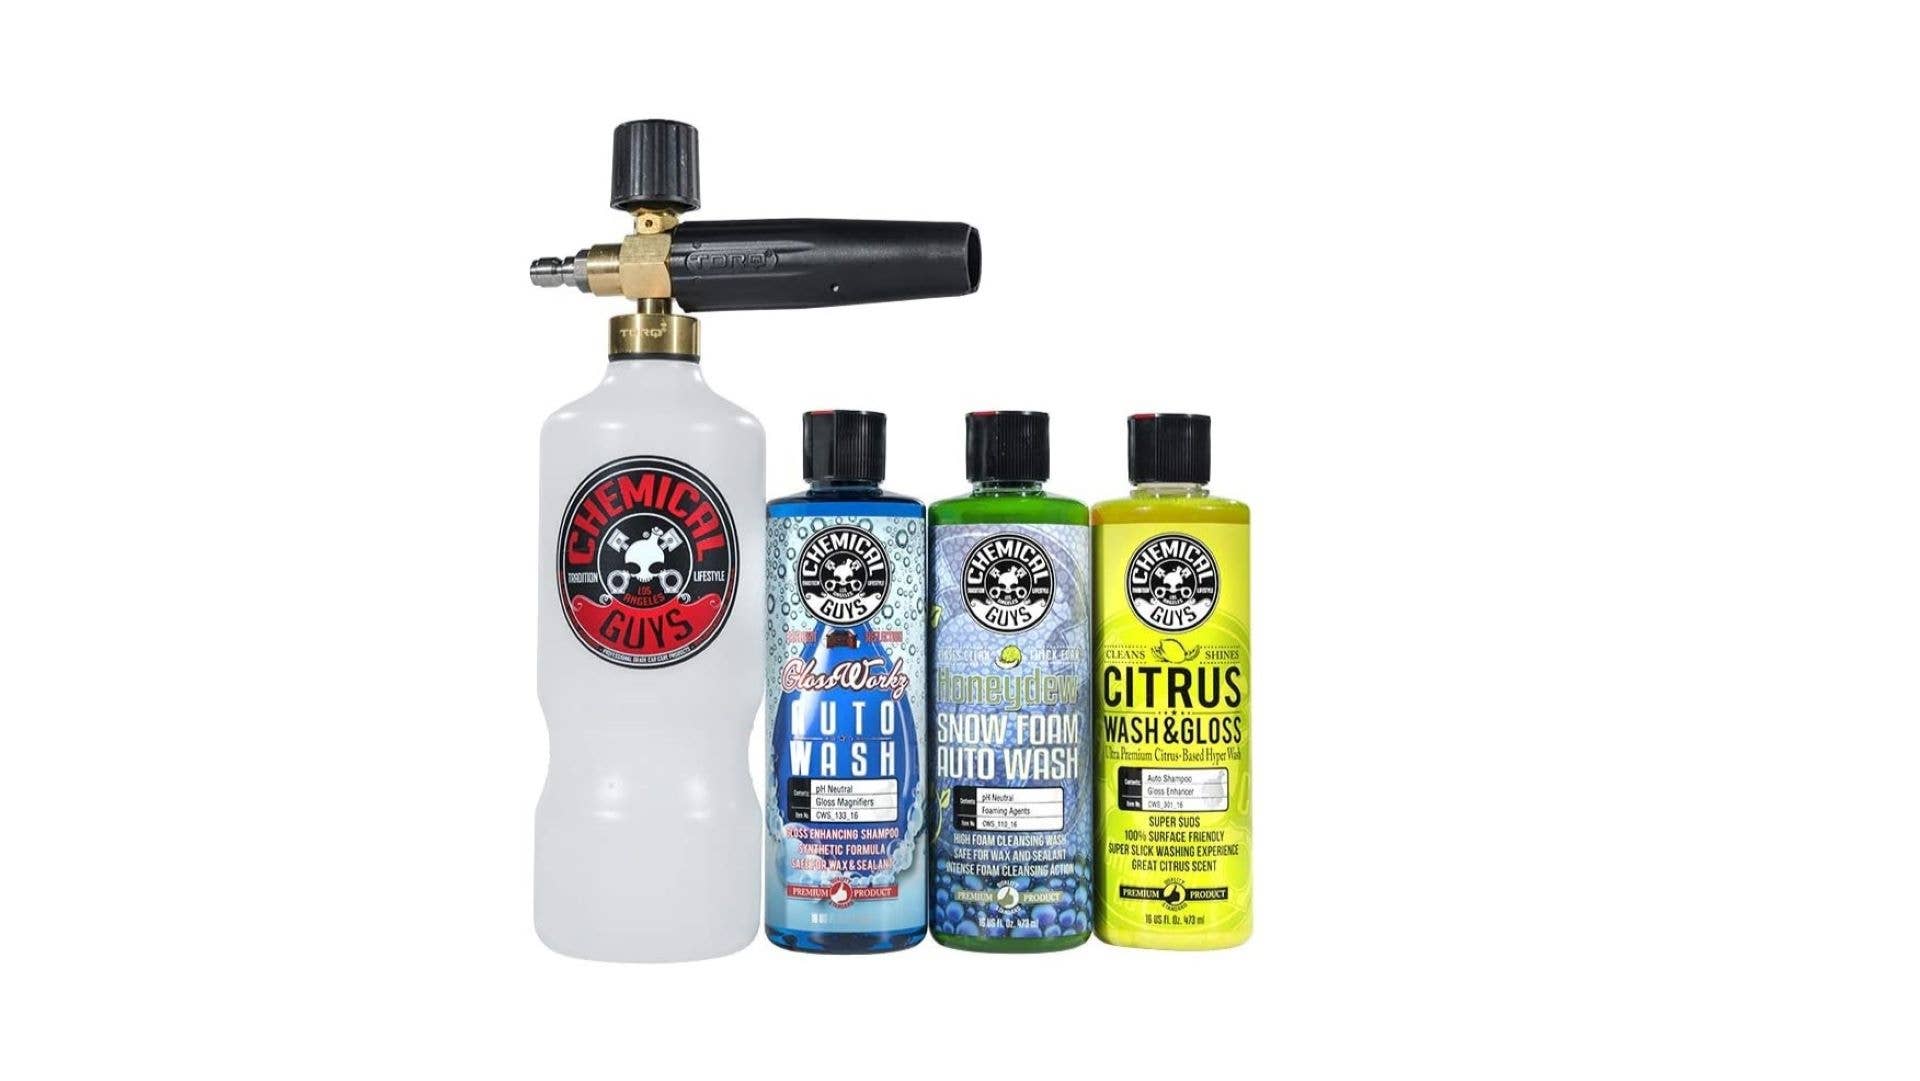 Save 23% On Chemical Guys Foam Cannon and Bring Those Migratory Birds Home  With More Deals